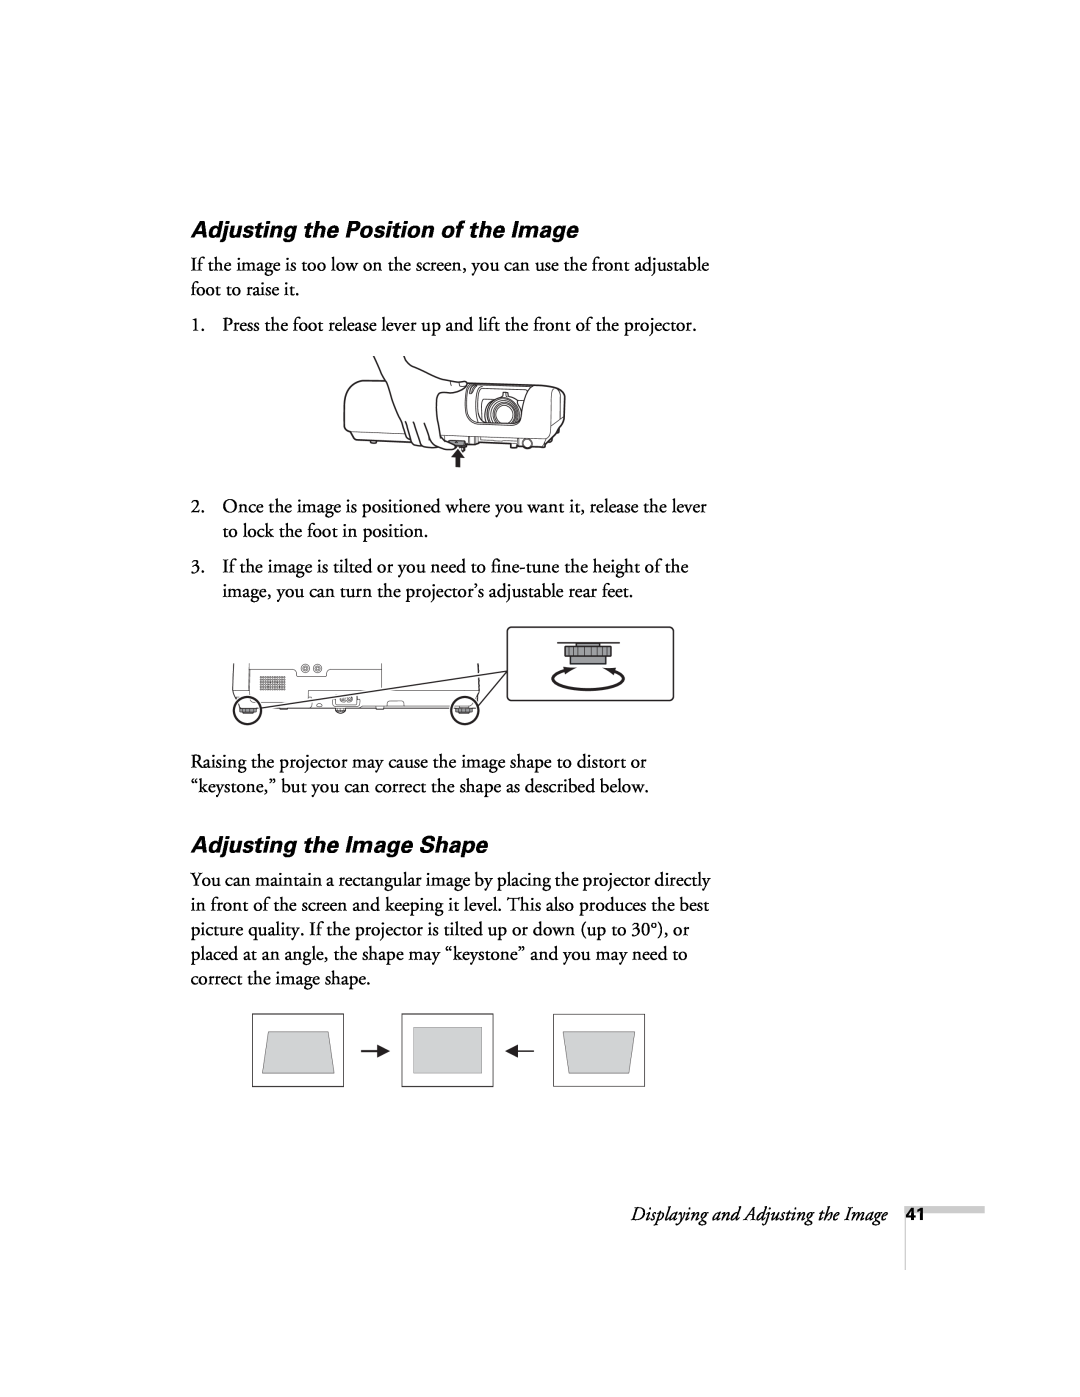 Univex 700 manual Adjusting the Position of the Image, Adjusting the Image Shape, Displaying and Adjusting the Image 